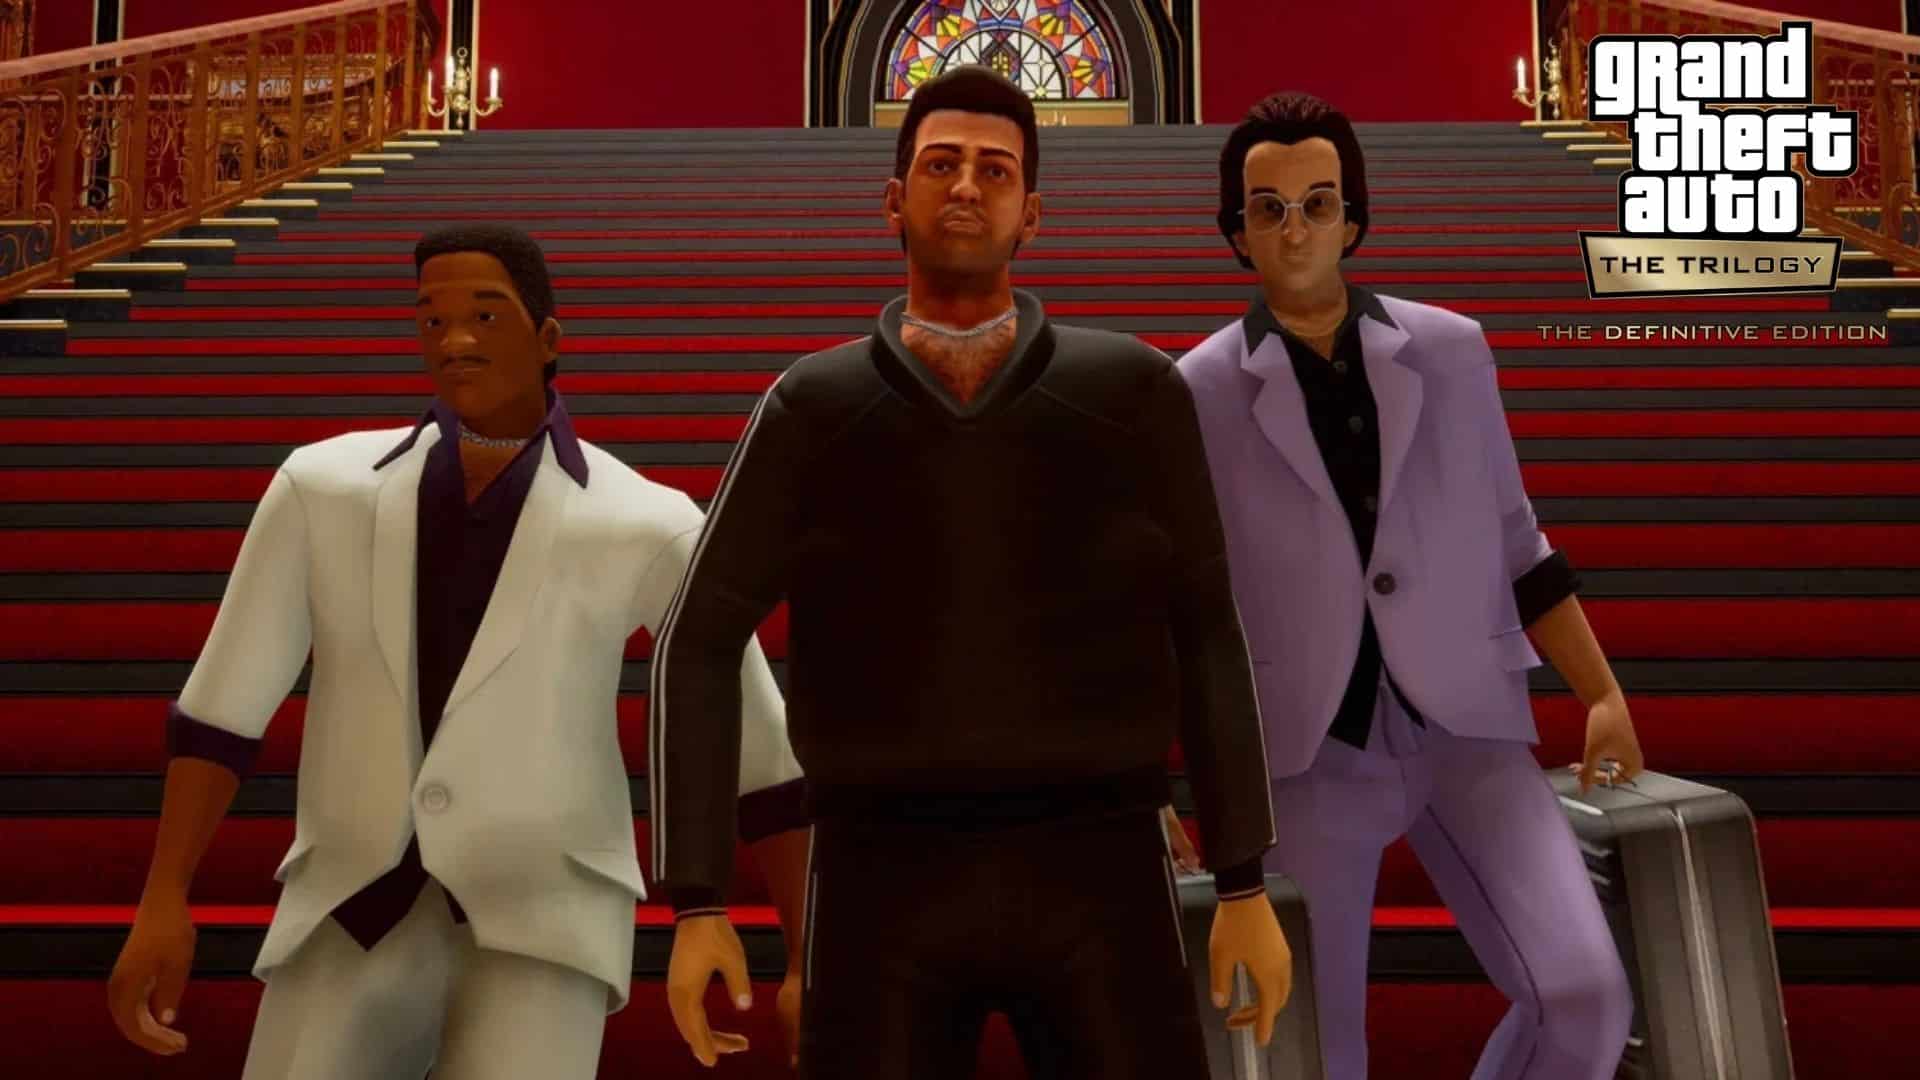 GTA Vice City characters walking down stairs in GTA Trilogy remasters